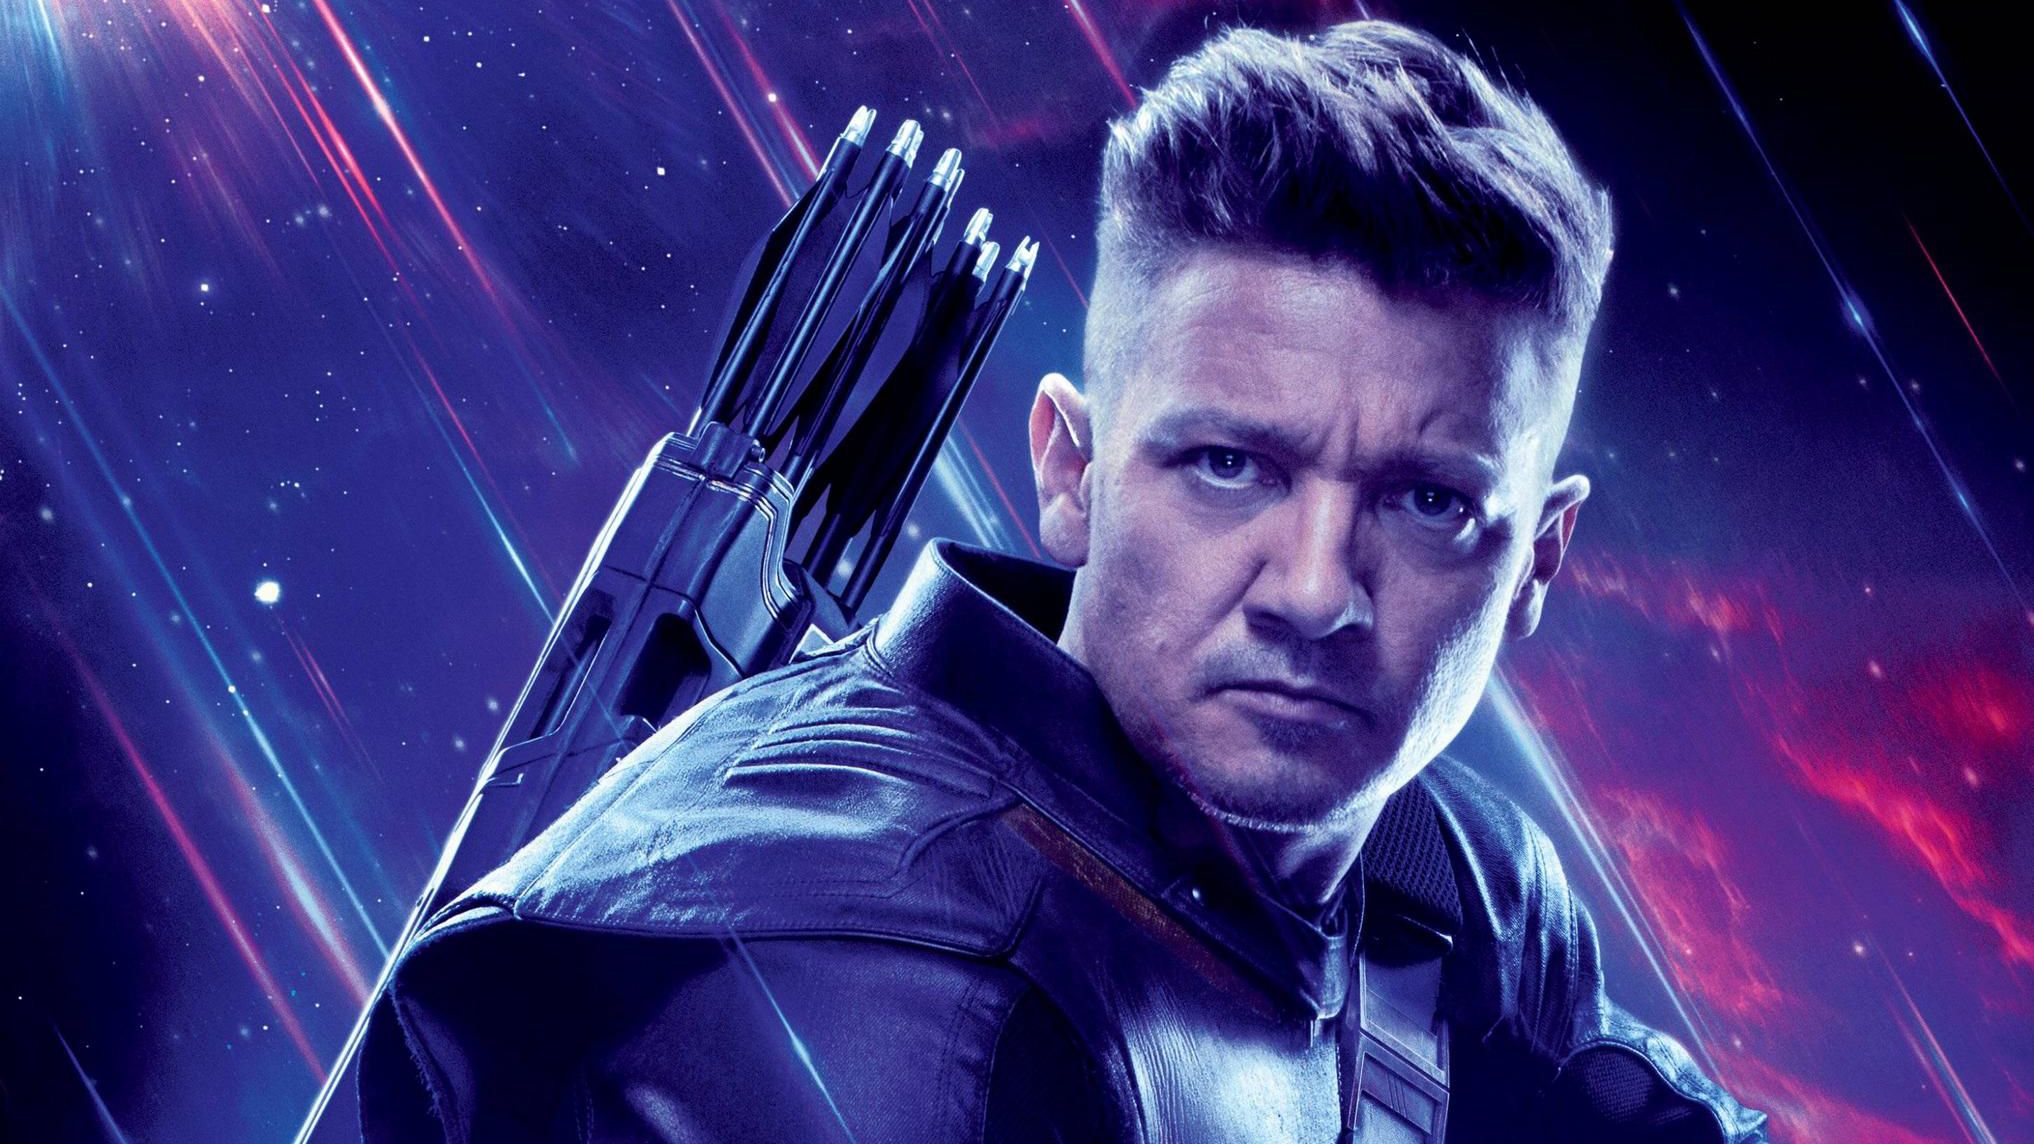 Marvel Character Hawkeye HD Wallpaper Collection